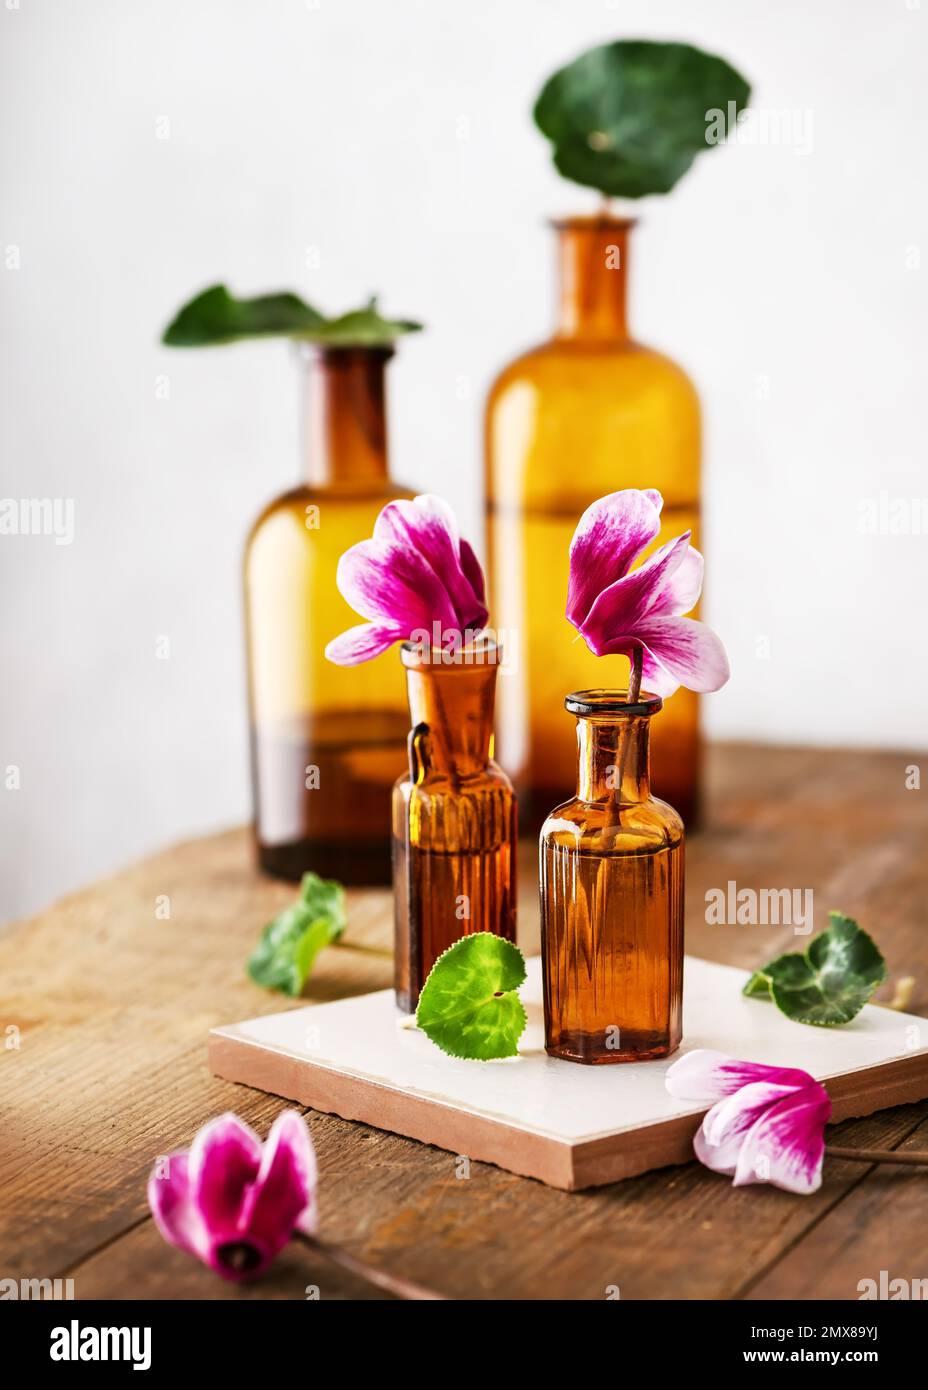 Still life with small bouquet of purple cyclamen flowers in brown pharmacy glass bottles on a wooden table. Stock Photo